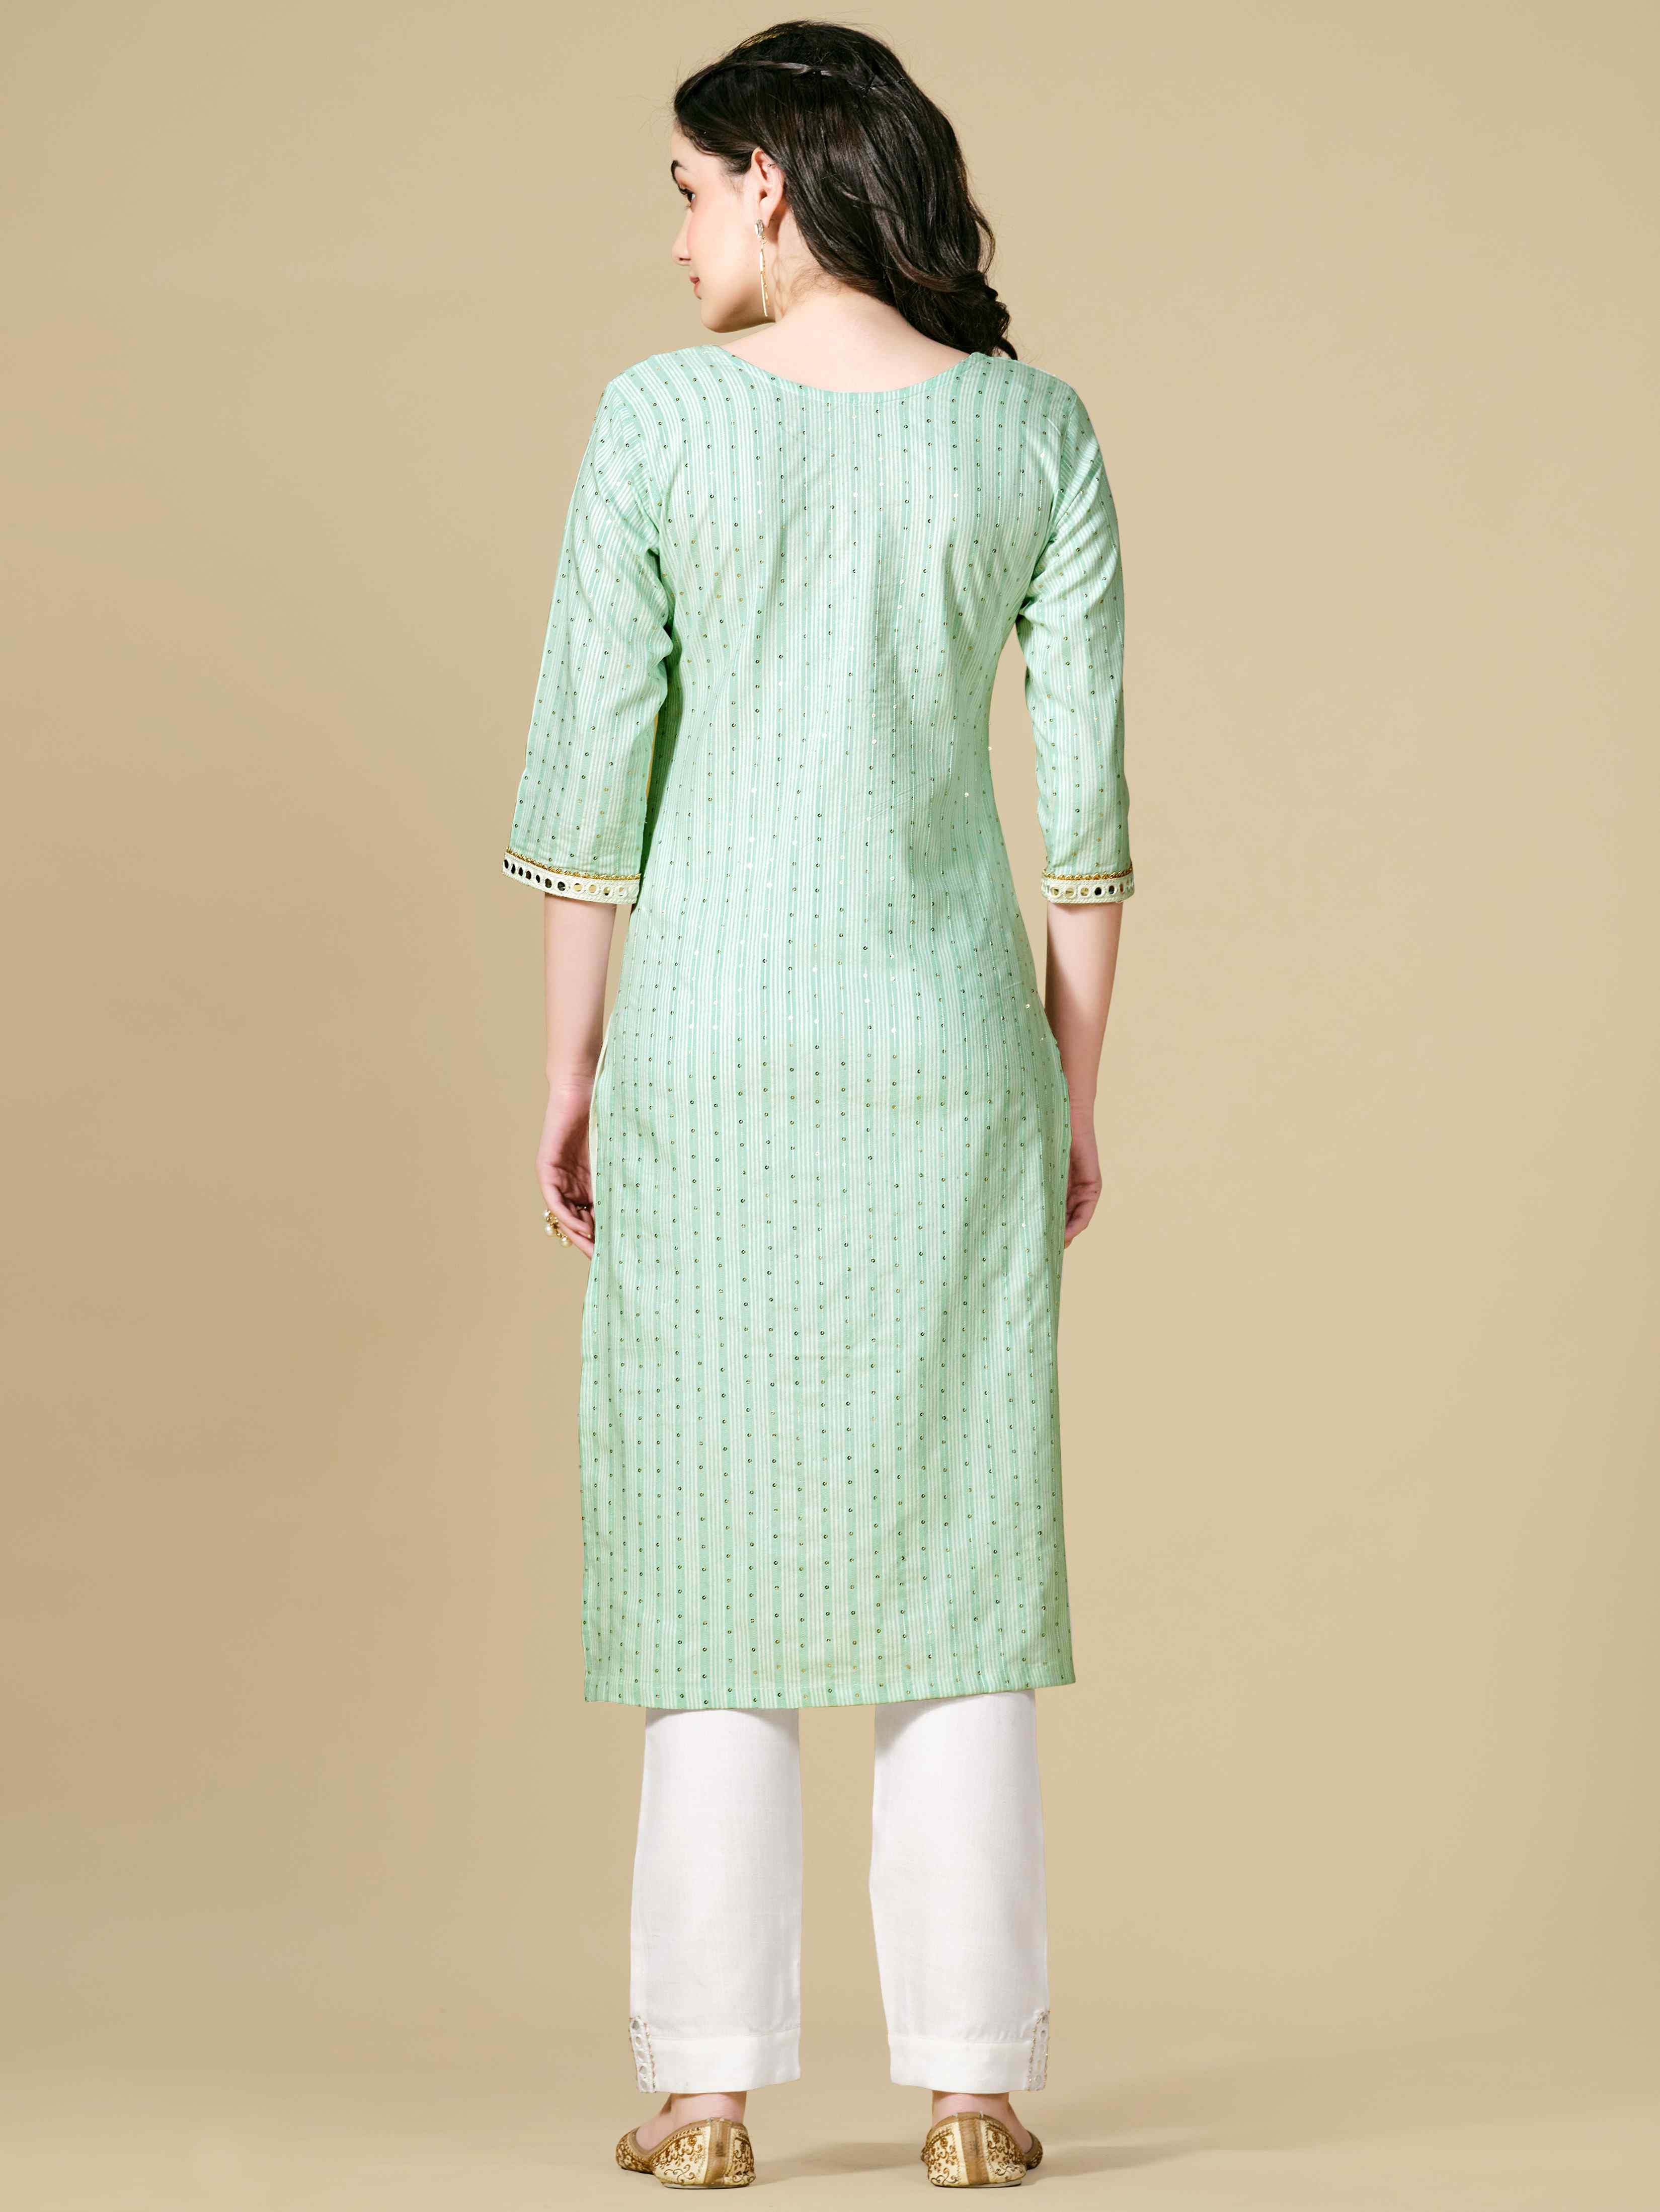 COTTON STRIPED SEQUINS WEAVE FABRIC KURTI WITH EMBROIDERED MIRROR LACE